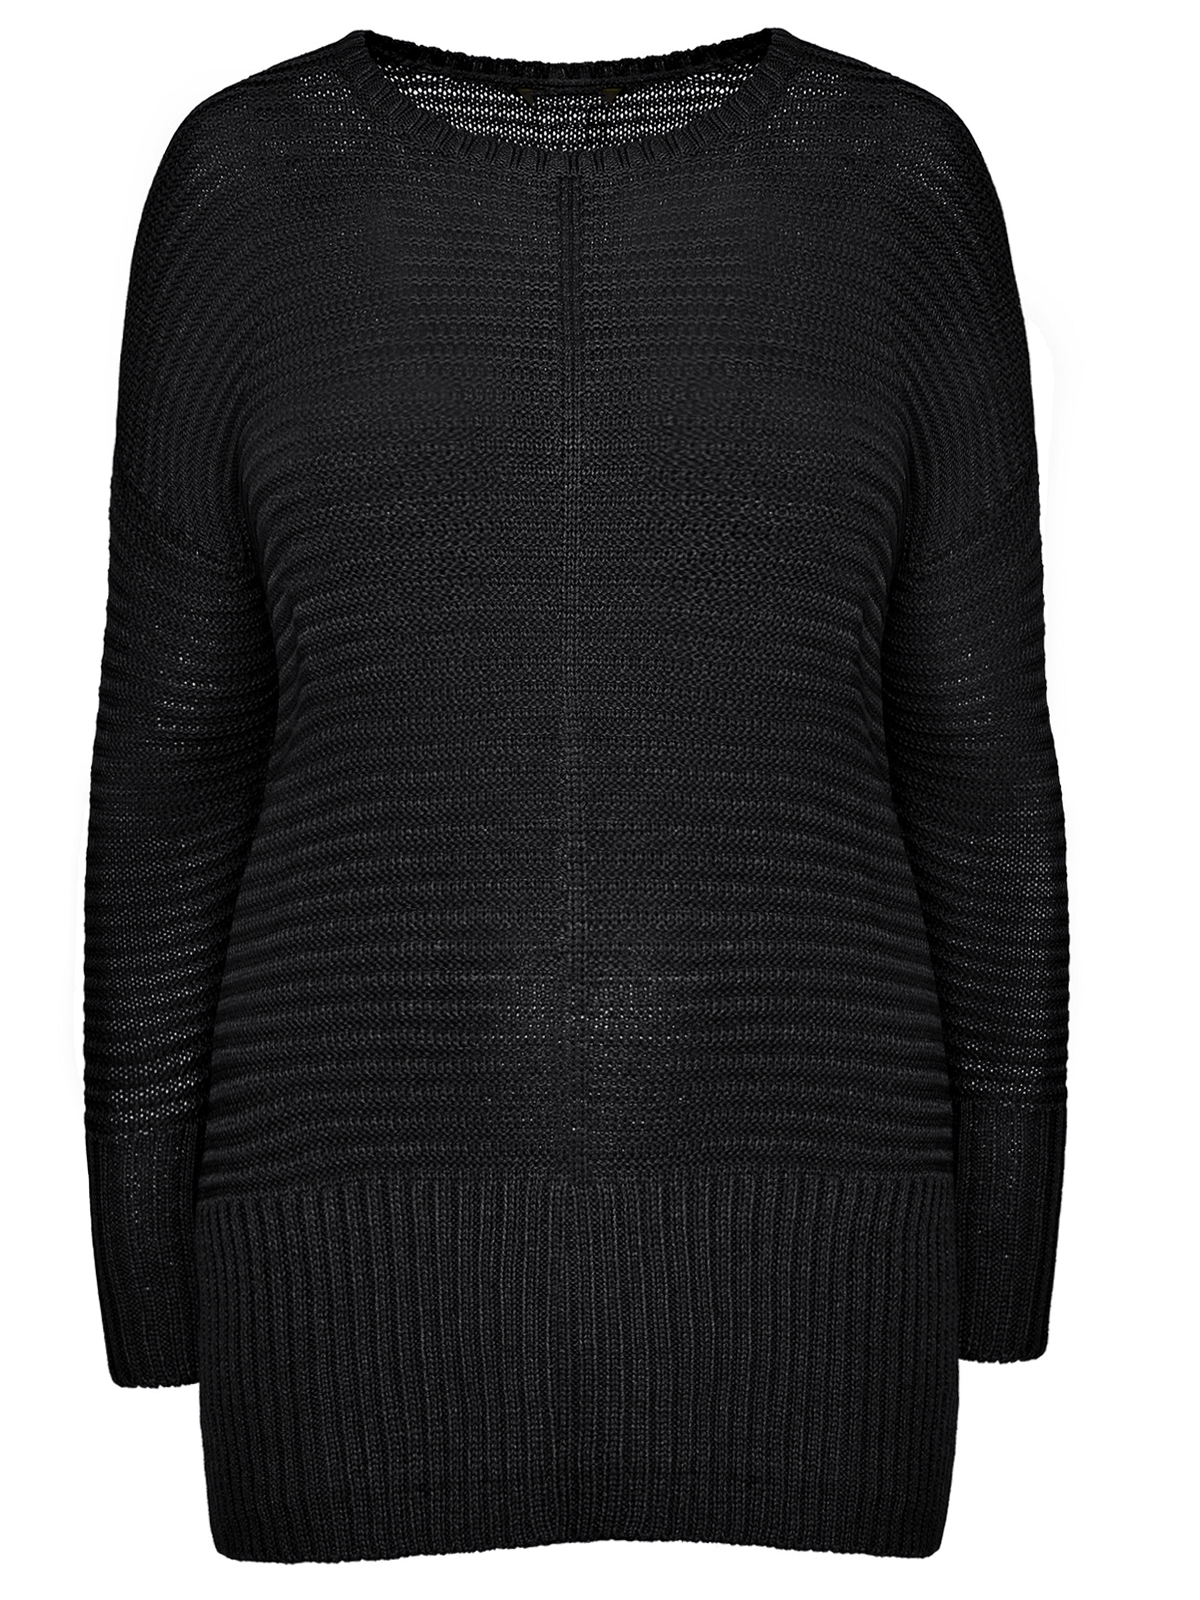 CURVE - - BLACK Ribbed Knitted Jumper - Plus Size 14 to 34/36